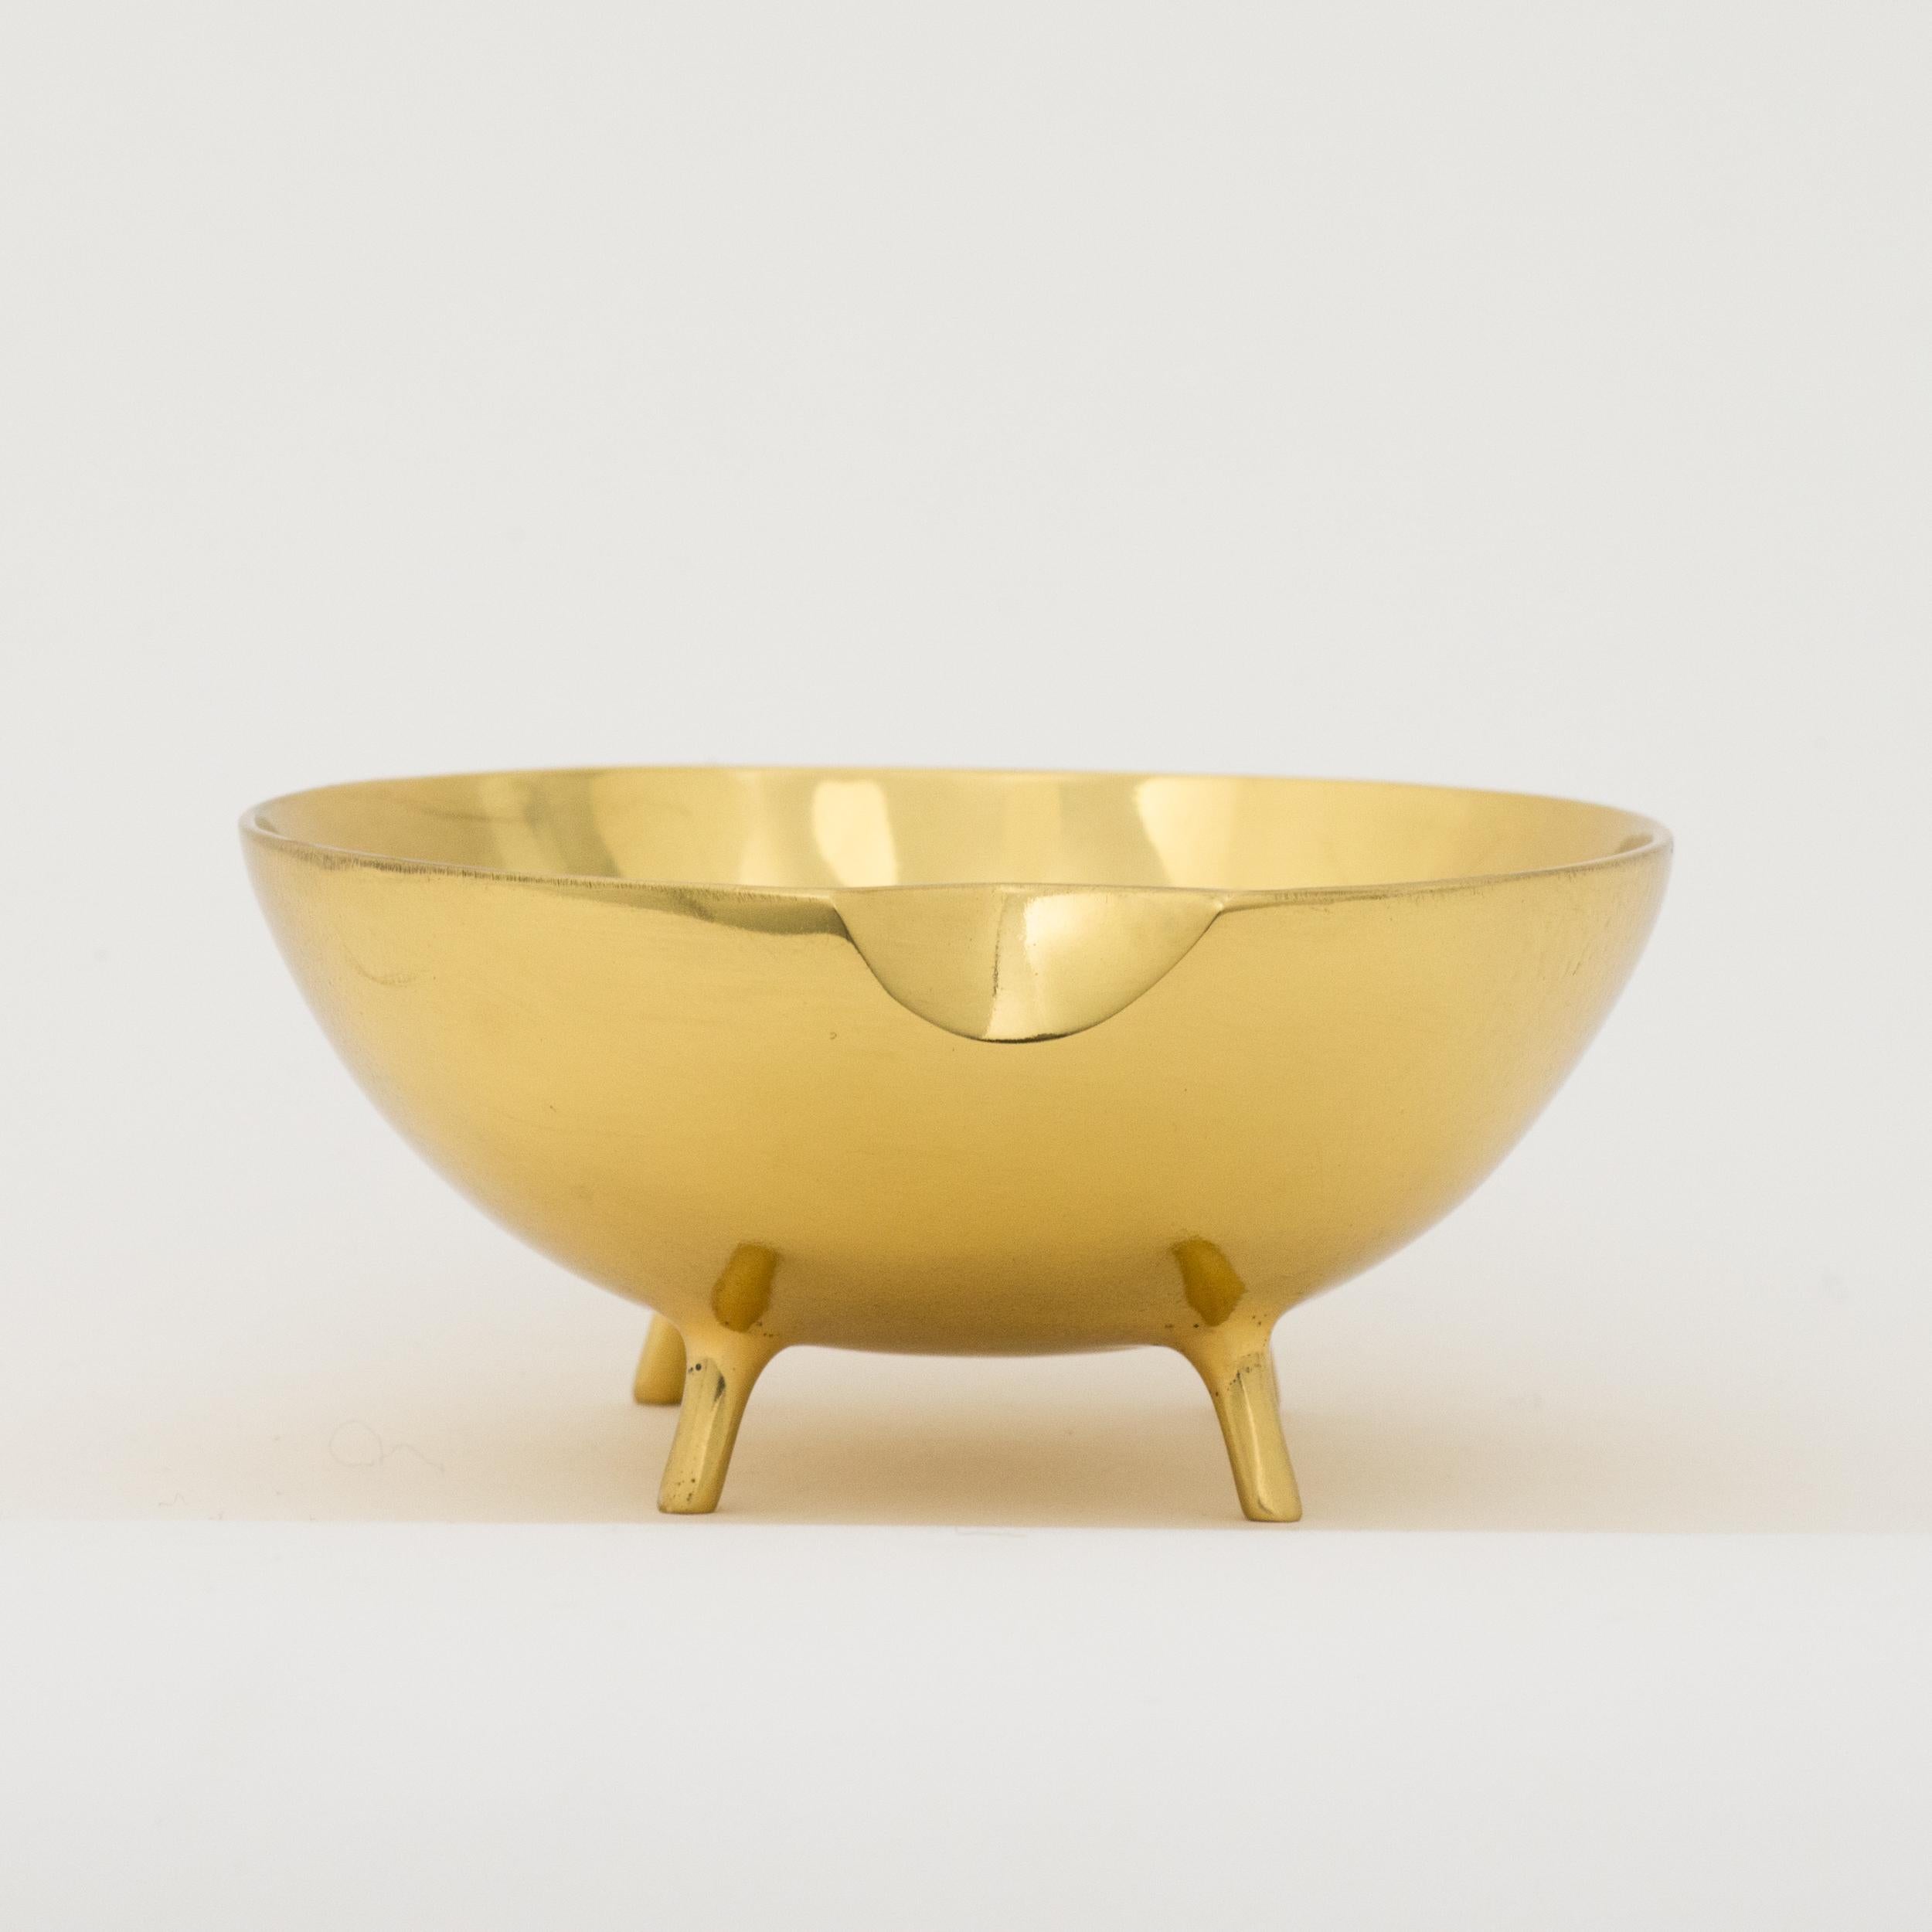 Cast Polished Brass Decorative Bowl Vide-poche with Legs For Sale